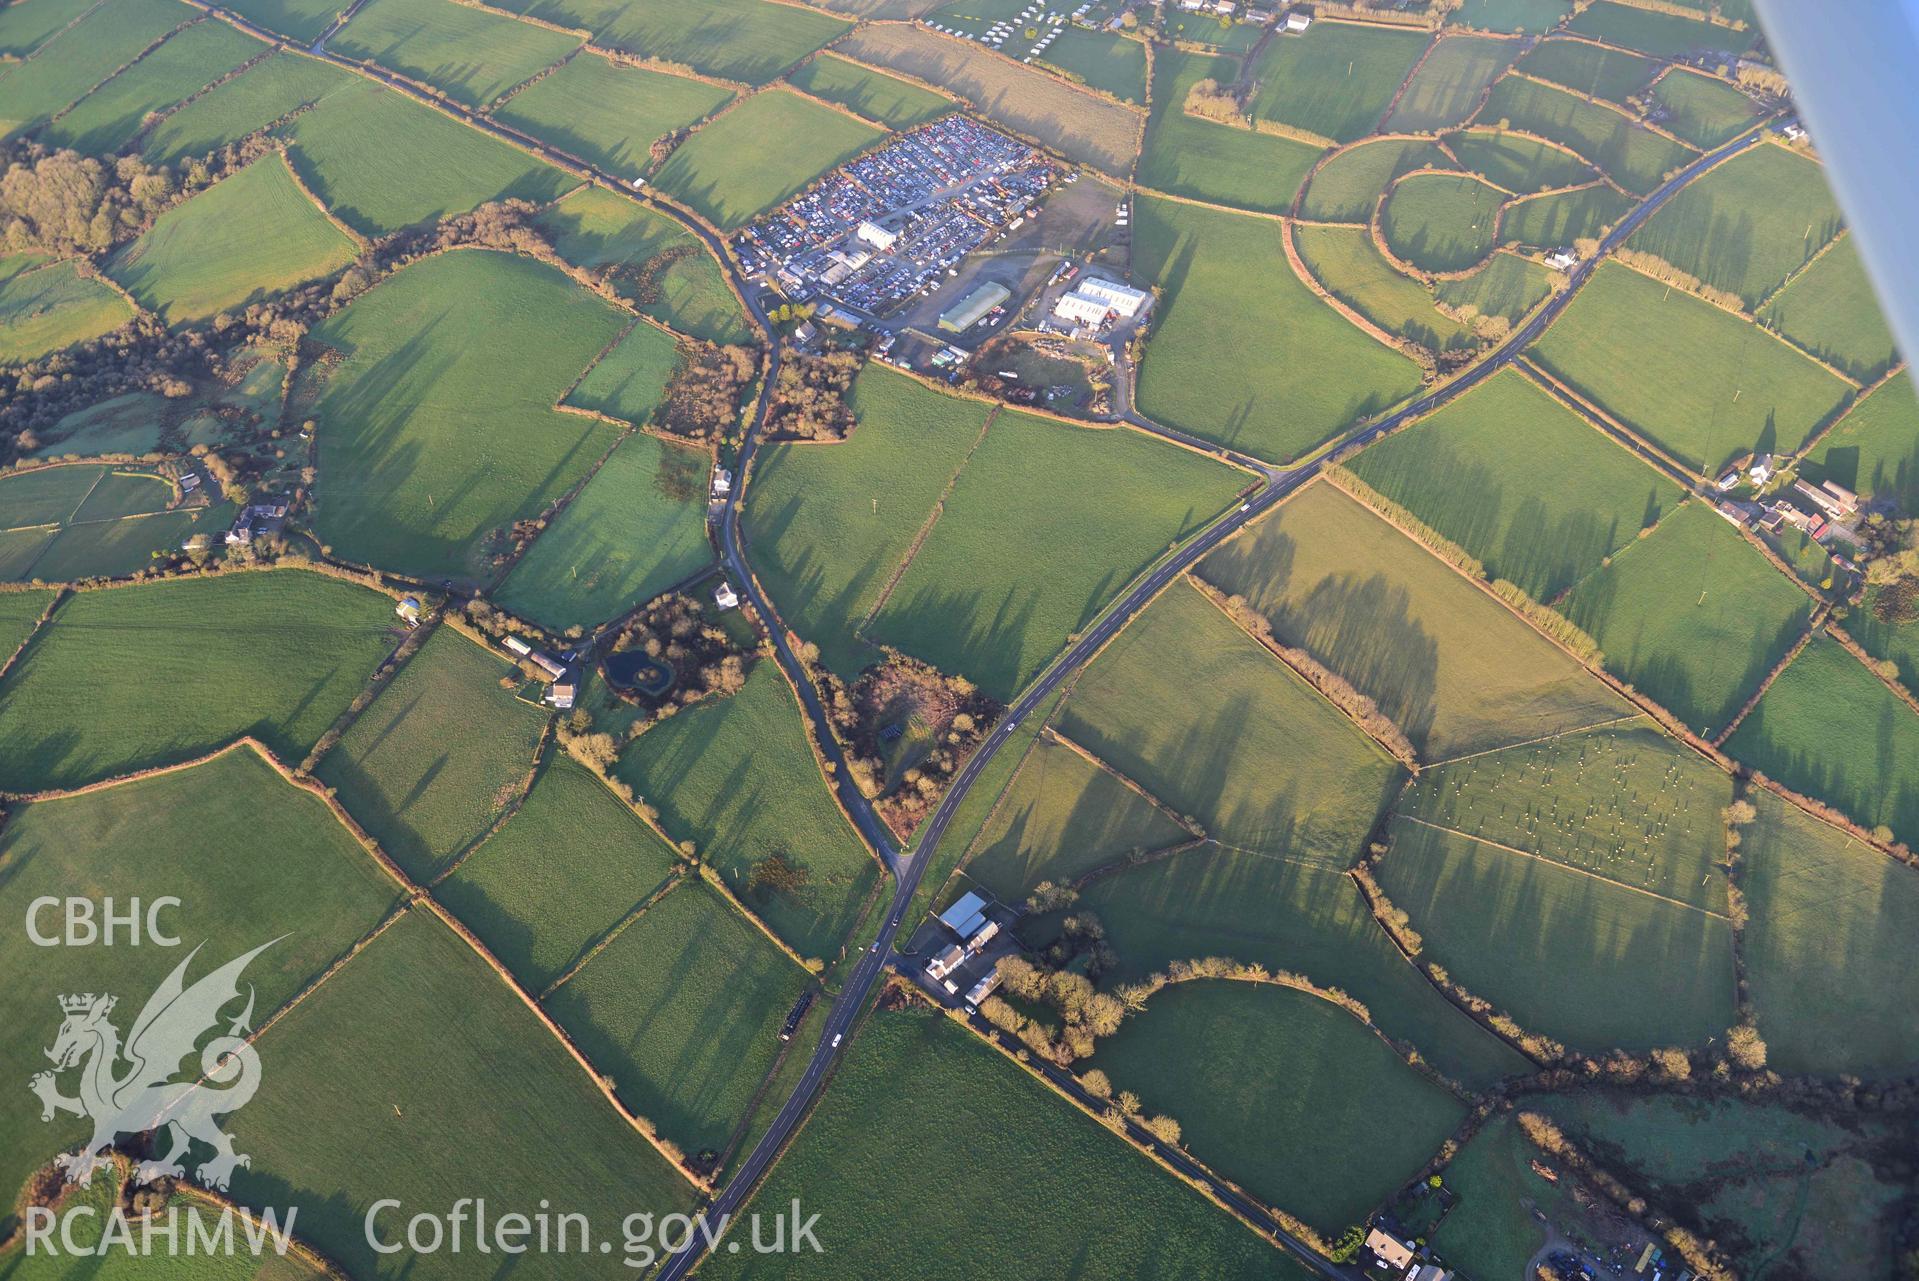 Oblique aerial photograph of Castell Nadolig hillfort, view from west in low winter light. Taken during the Royal Commission